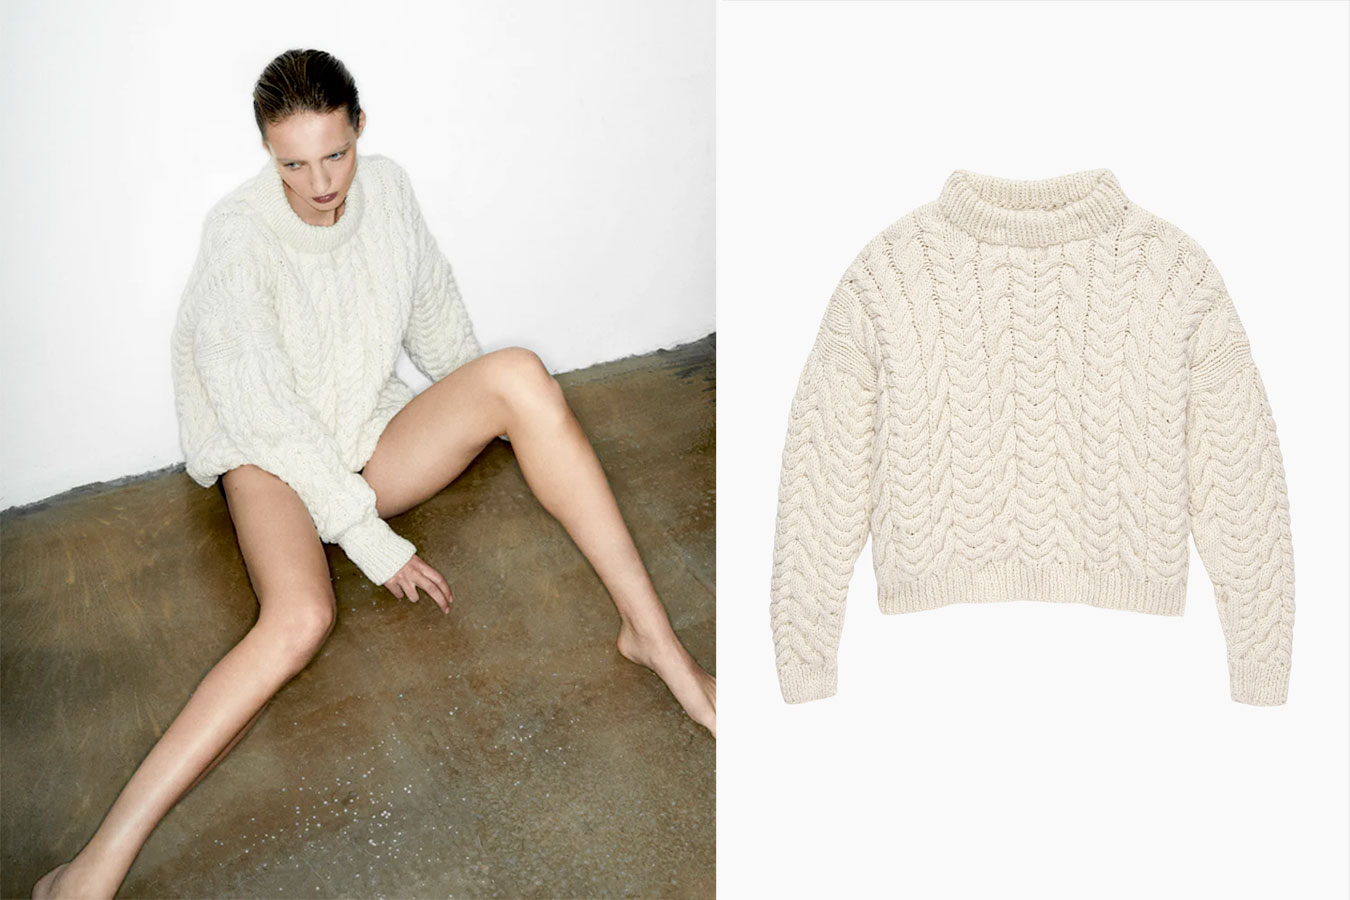 Janessa Leone Margaux Sweater. Cropped white hand knit cableknit sweater from regenerative wool. On a model and alsone